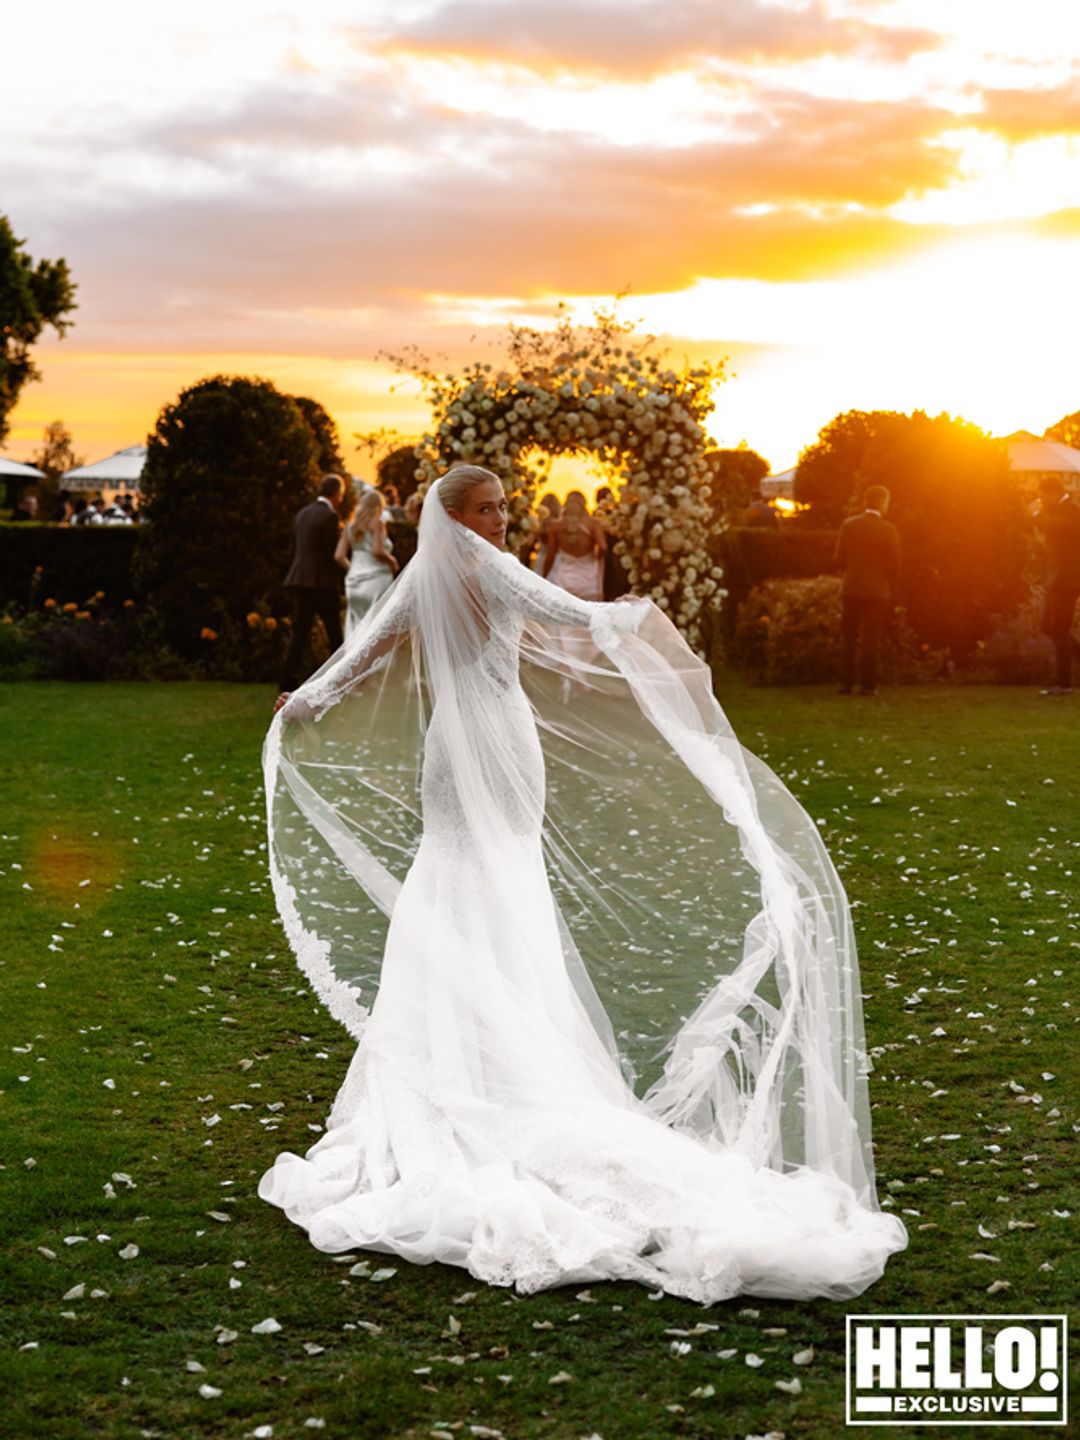 Amelia Spencer showing off her veil with the sunset behind her